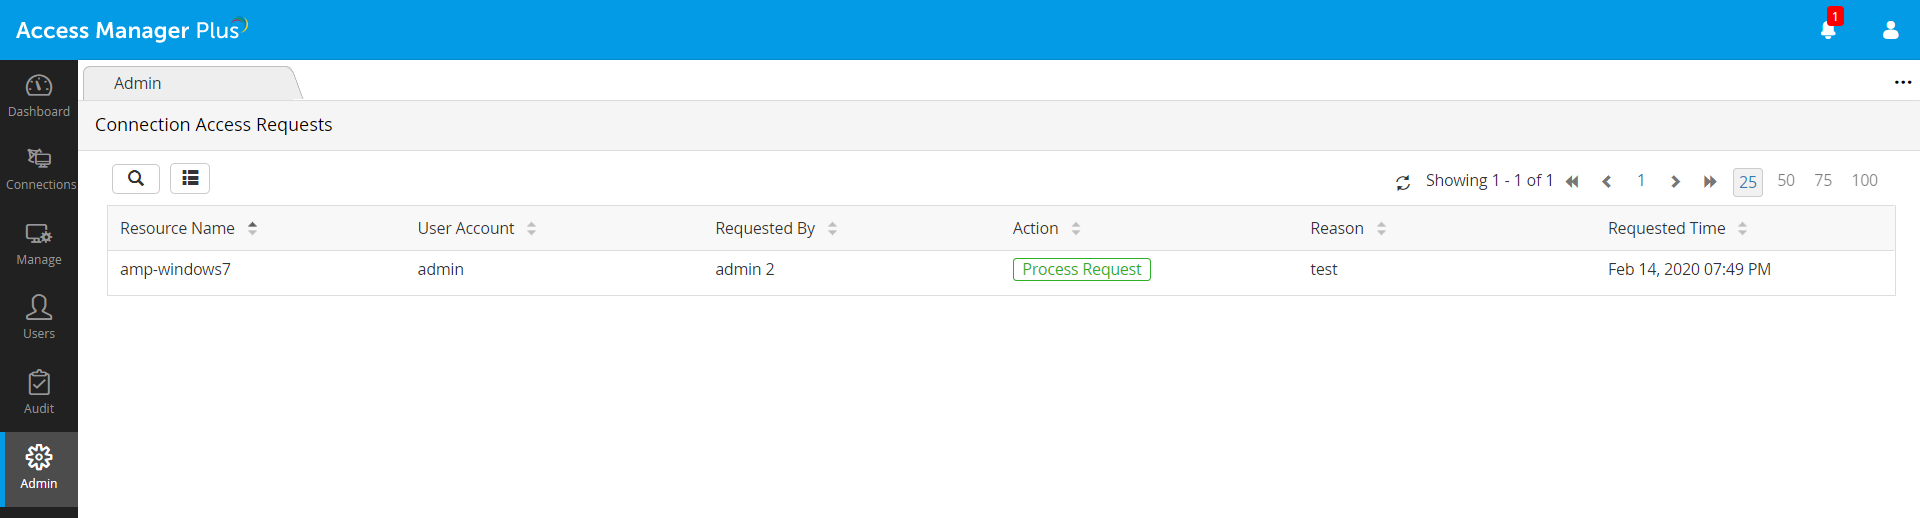 Request approve release workflow in Access Manager Plus